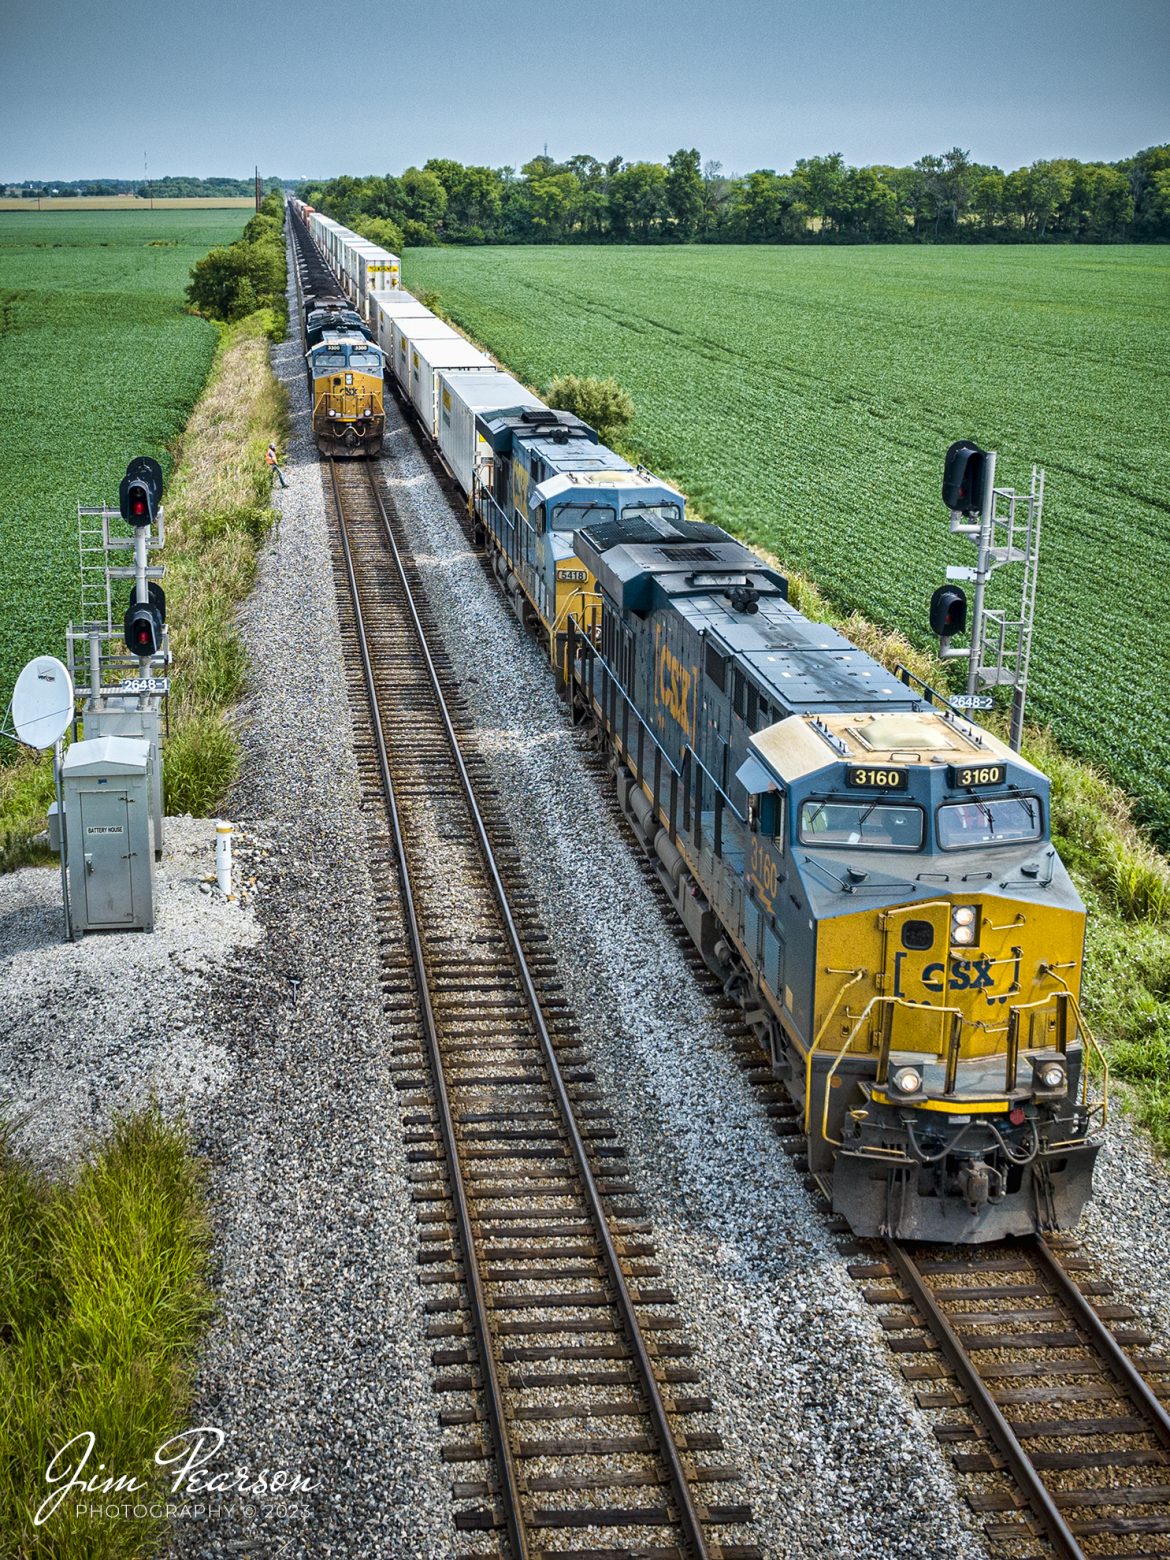 CSXT 3160 and 5418 lead CSX hot intermodal I025 southbound as they pass a loaded coal train, toward the south end of King, outside of Ft. Branch, IN on the CE&D Subdivision on July 17th, 2023.

Tech Info: DJI Mavic 3 Classic Drone, RAW, 24mm, f/2.8, 1/1600, ISO 140.

#trainphotography #railroadphotography #trains #railways #dronephotography #trainphotographer #railroadphotographer #jimpearsonphotography #trains #csxt #mavic3classic #drones #trainsfromtheair #trainsfromadrone